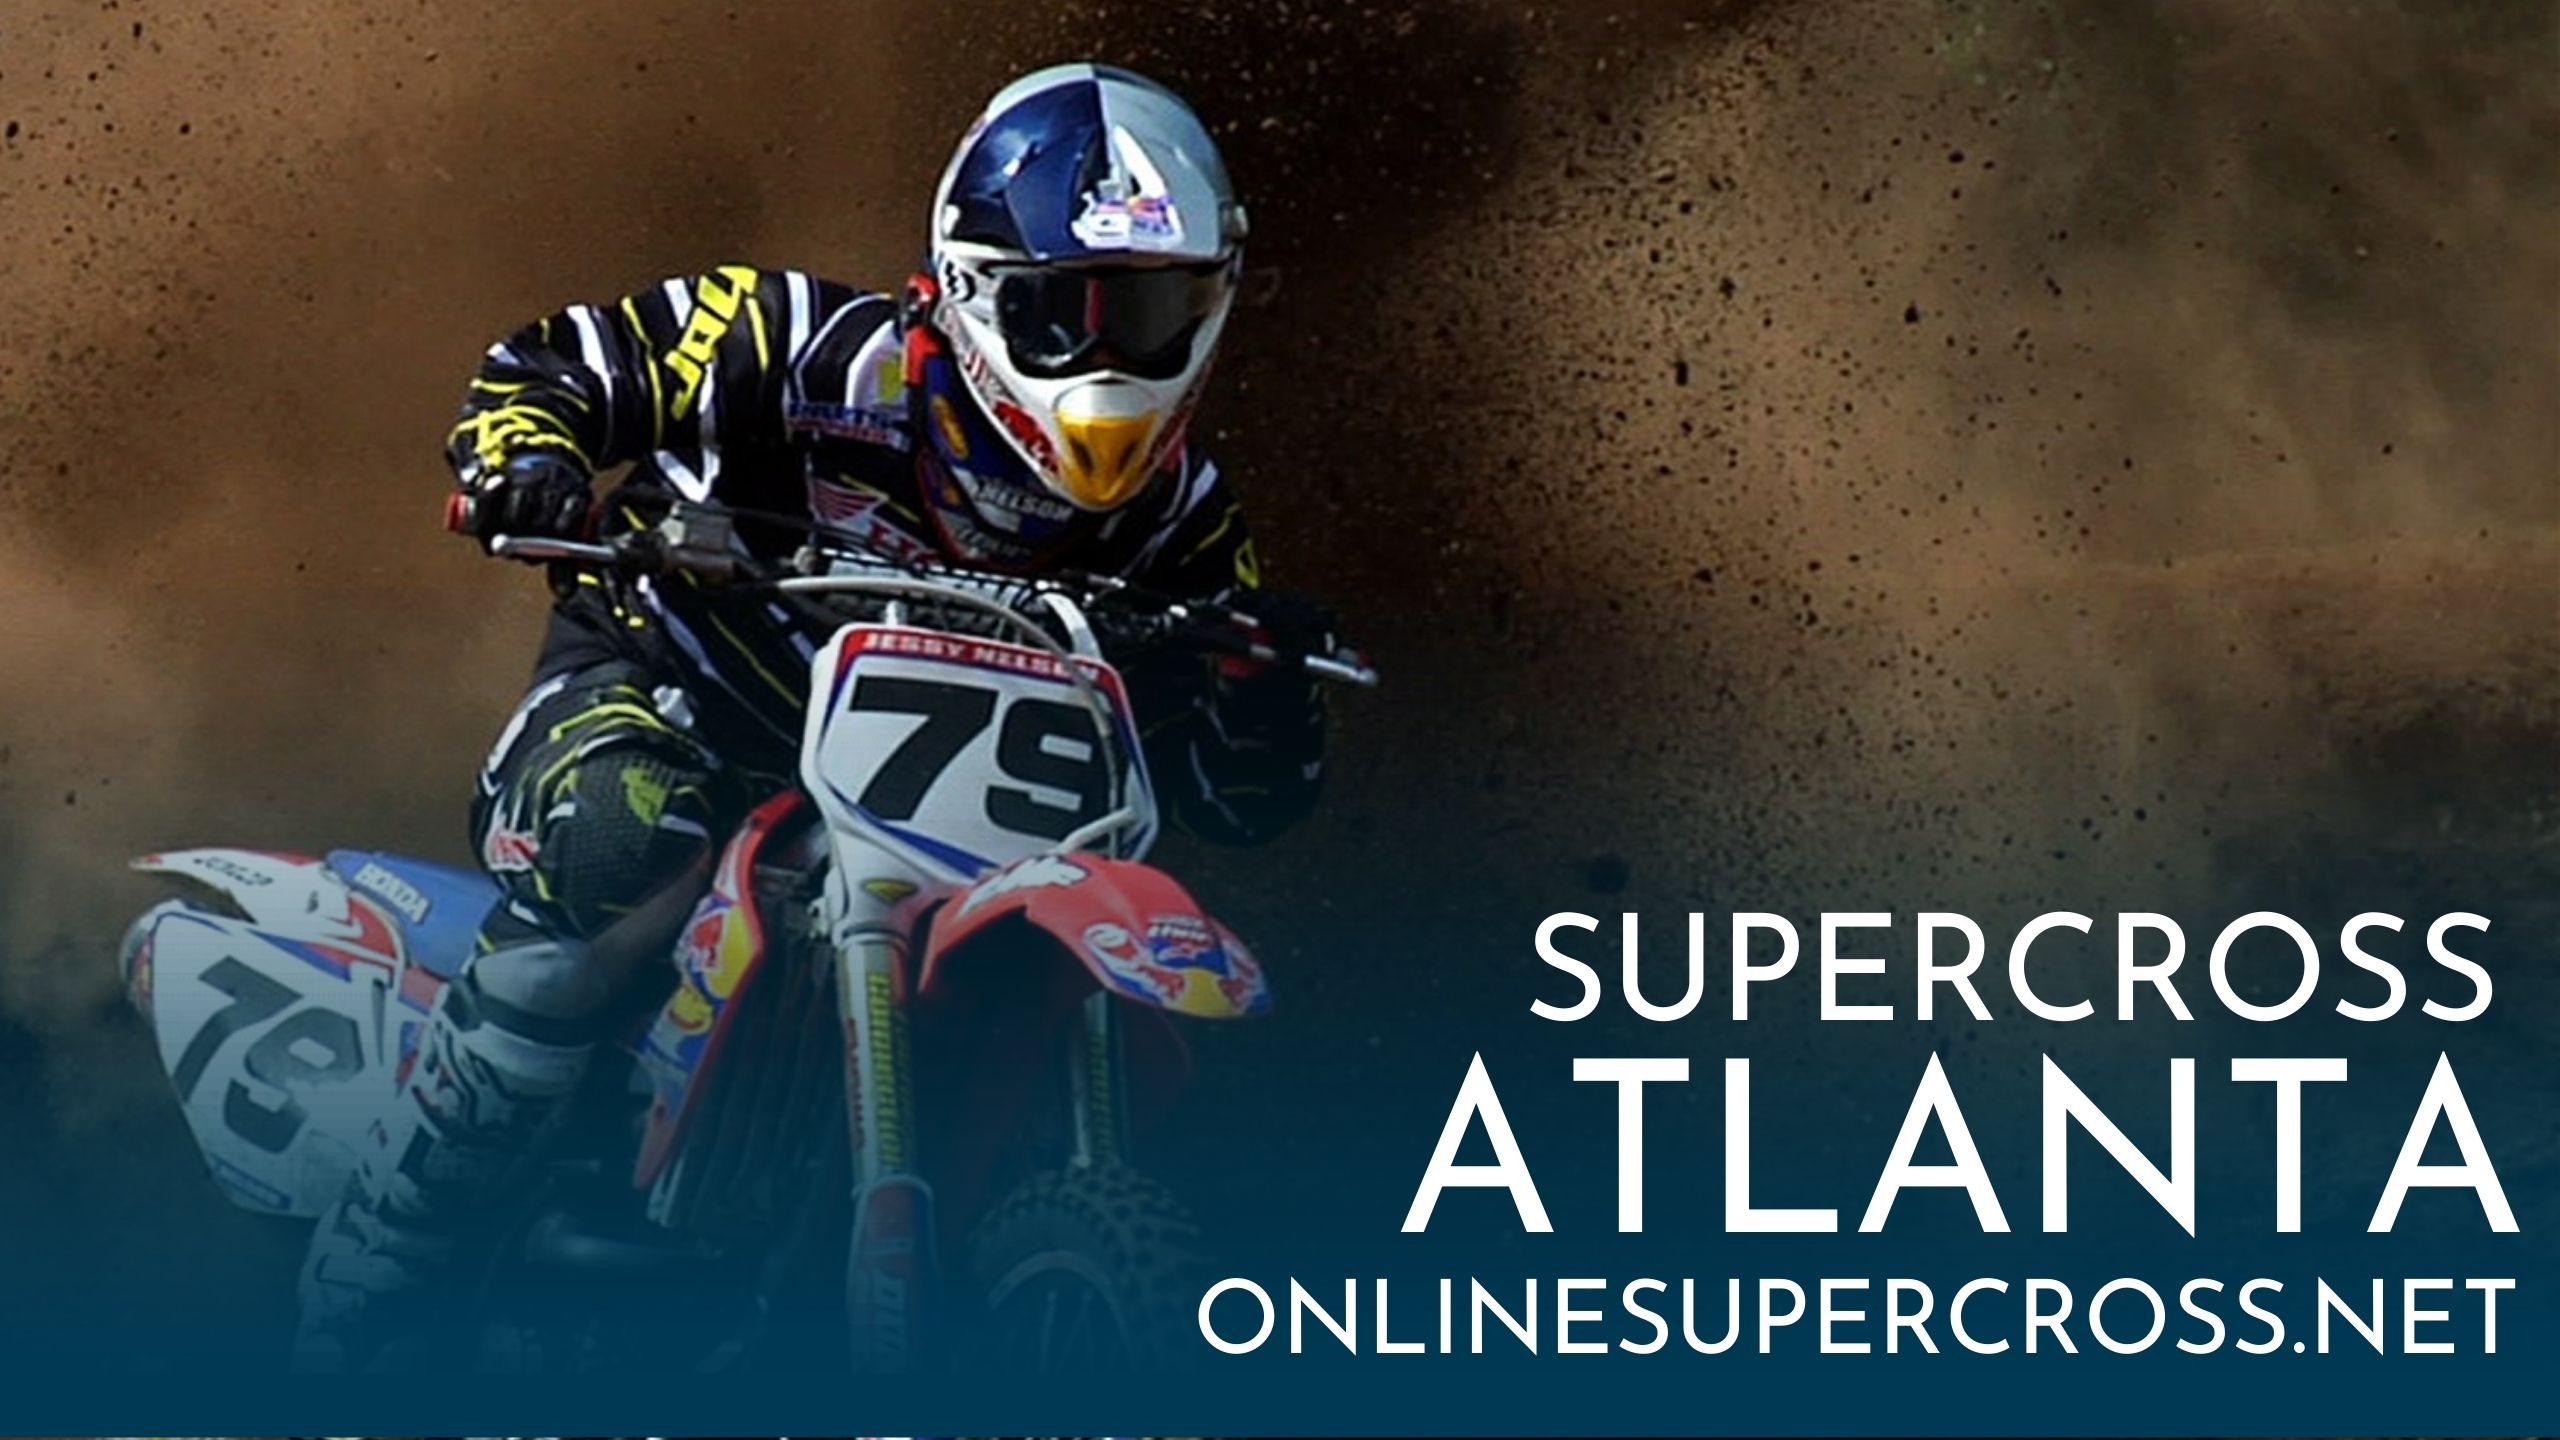 2016 East Rutherford AMA Supercross